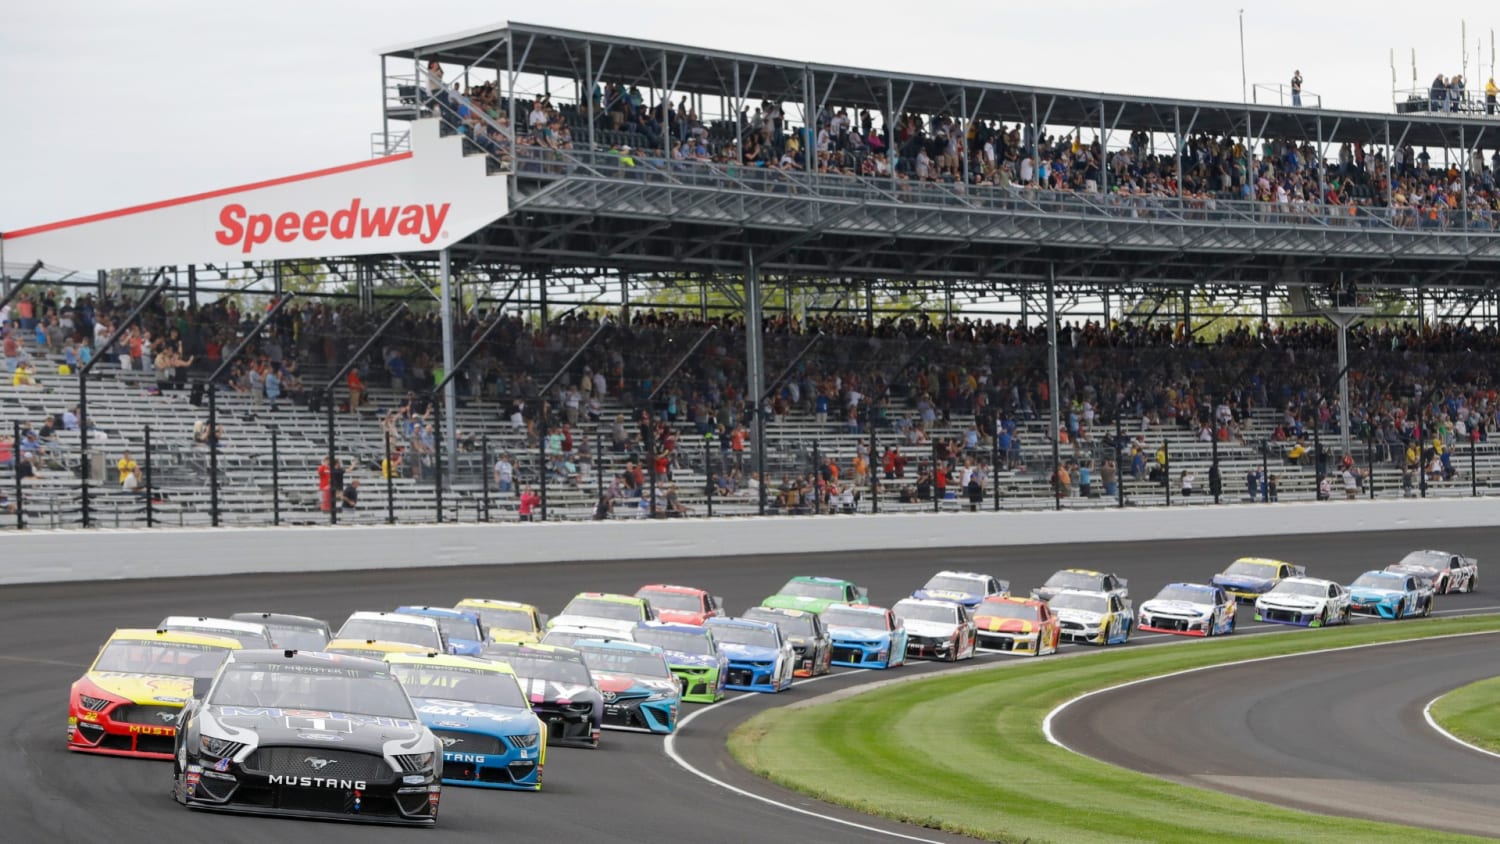 NASCAR's Incredibly-Named Hand Sanitizer 400 Will Be Closed to the Public, Because COVID-19